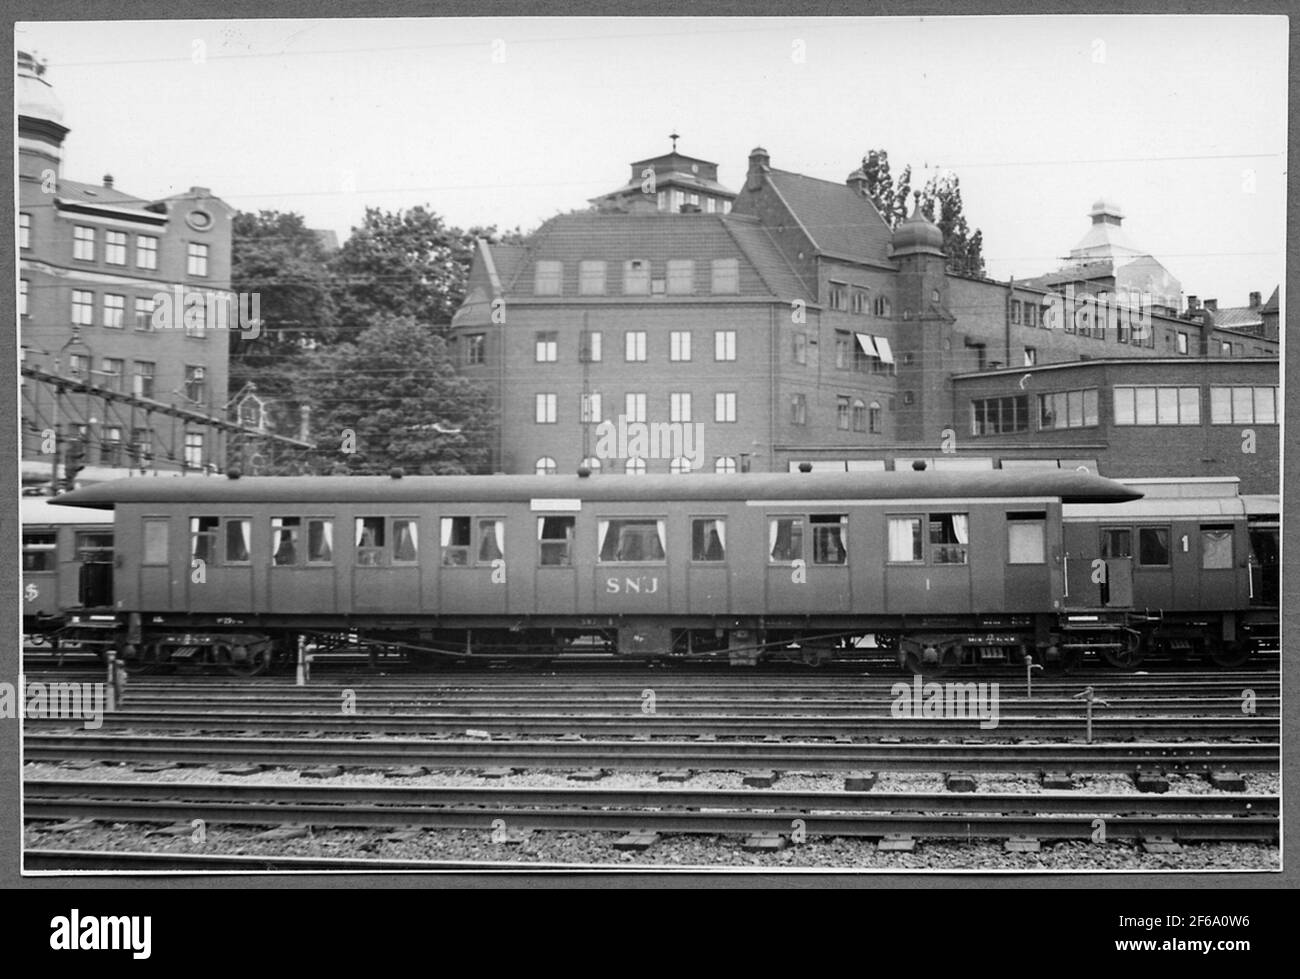 Stockholm-Nynäs Railway, SNJ BCO 1 on trails at Stockholm Central Station. Stock Photo